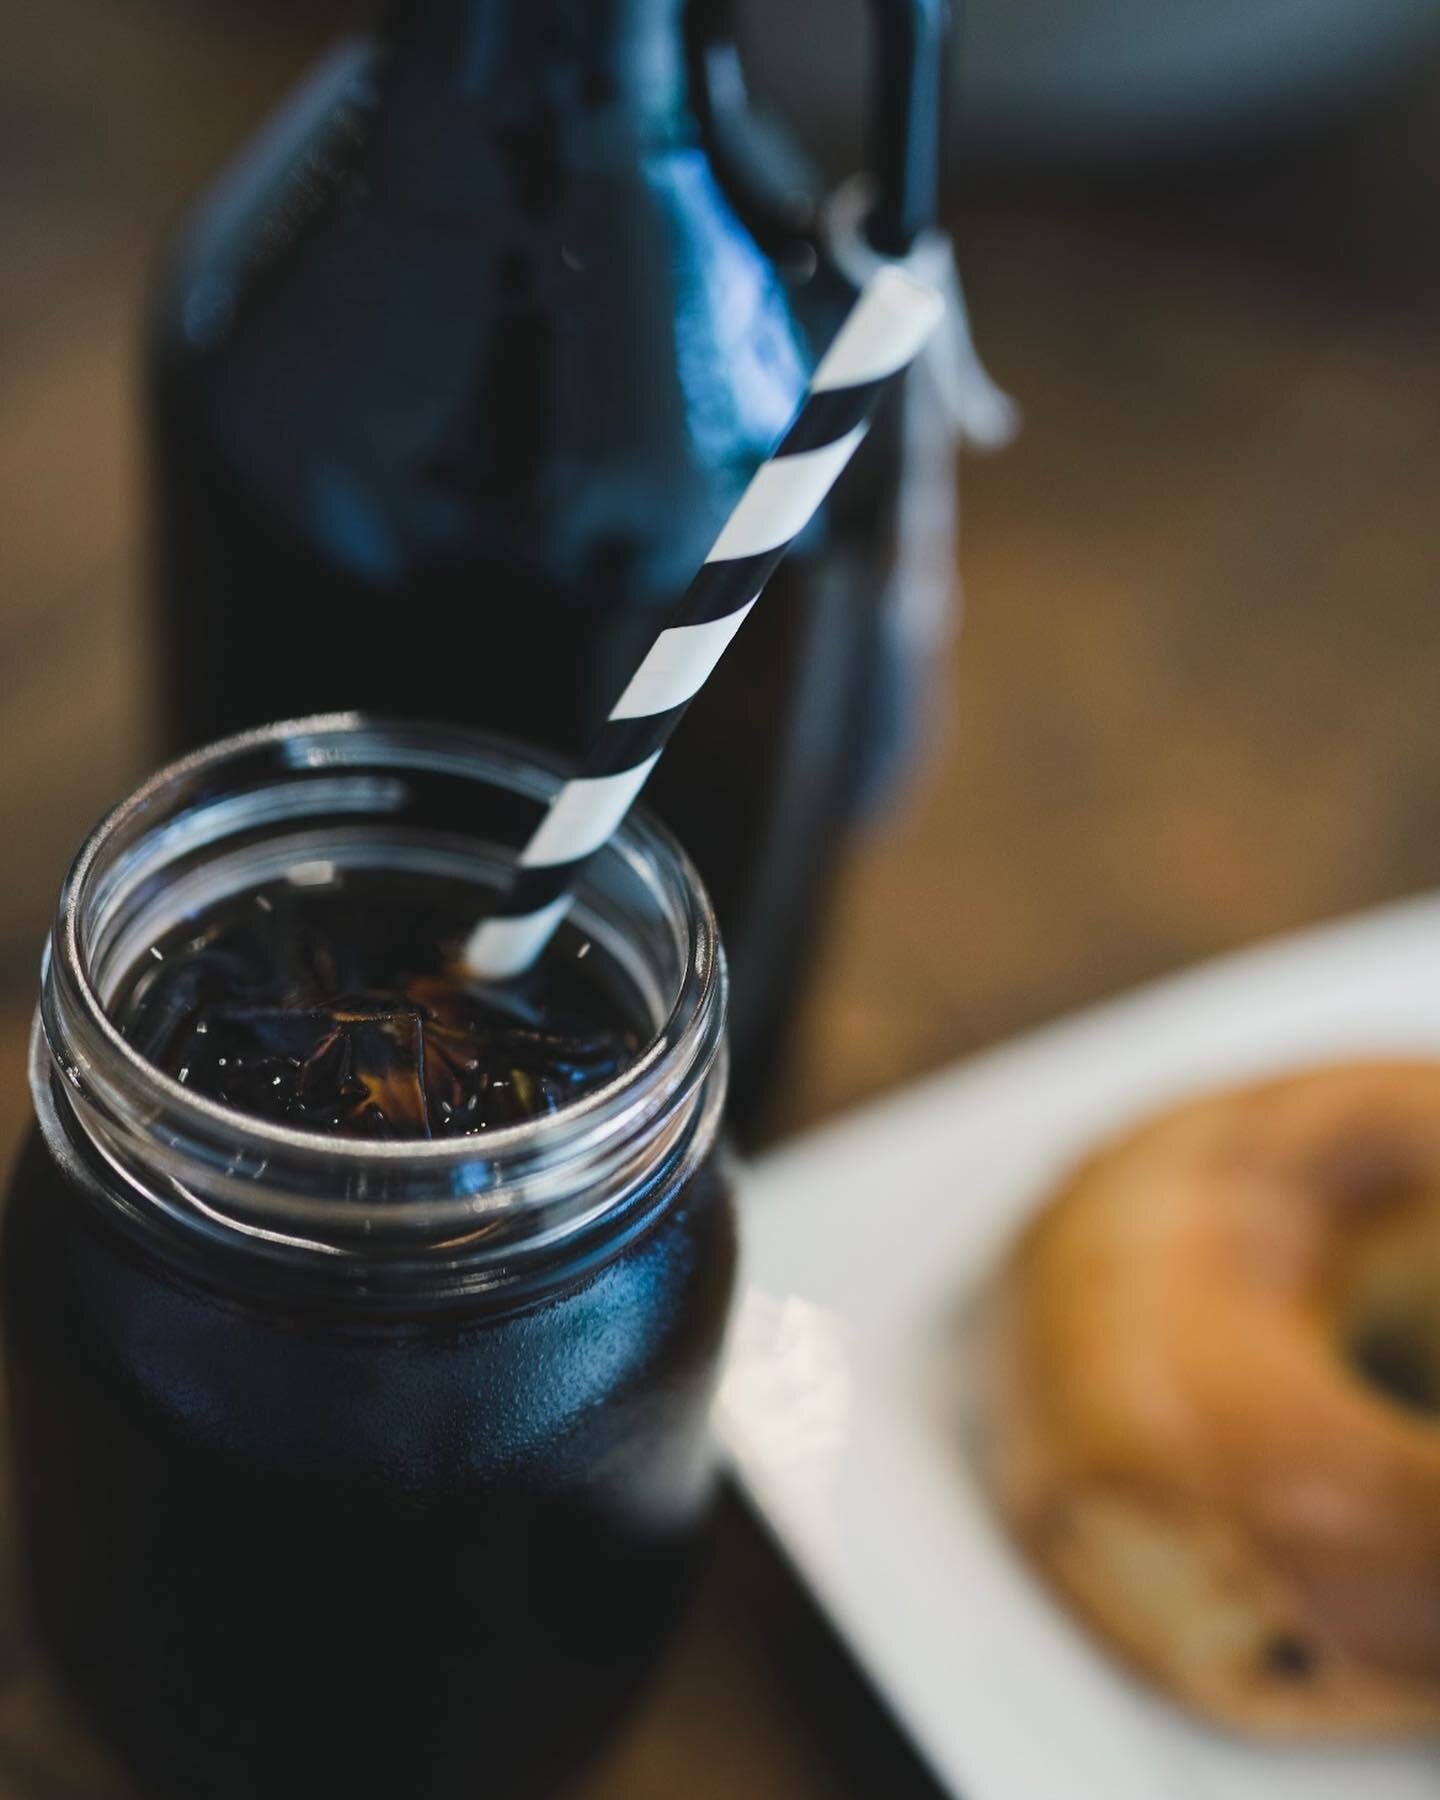 Still trying to adjust to Daylight Savings? Let us caffeinate you with our delicious cold brew! Best part, we&rsquo;ll deliver it straight to your door.

#coldbrew #coldbrewcoffee #coldbrews #coldbrewlatte #coldbrewedcoffee #coldbrewed #coldcoffee #c